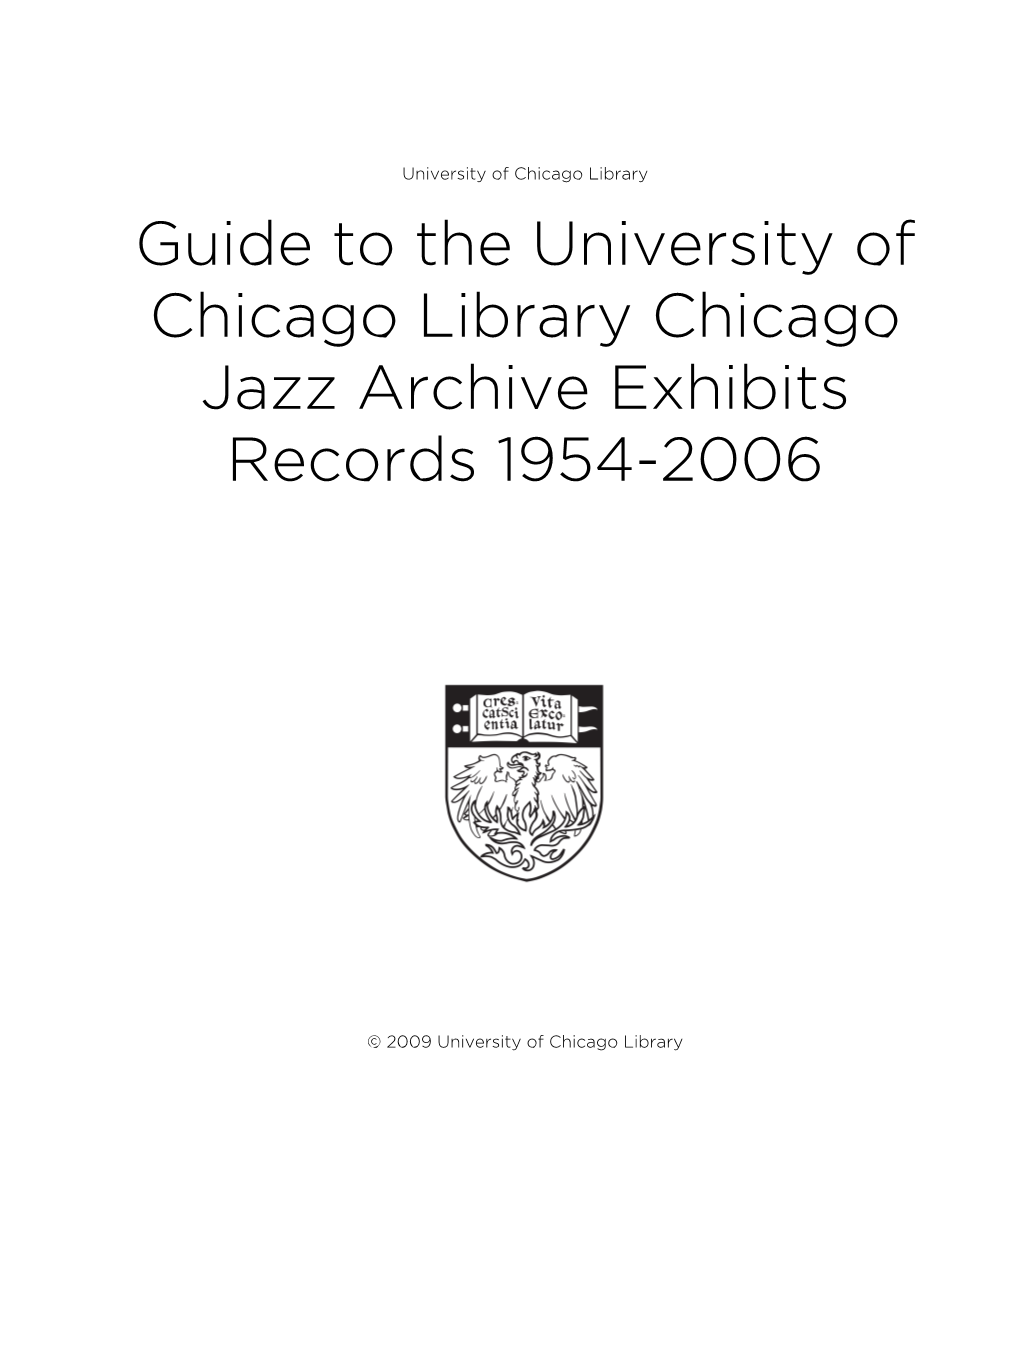 Guide to the University of Chicago Library Chicago Jazz Archive Exhibits Records 1954-2006